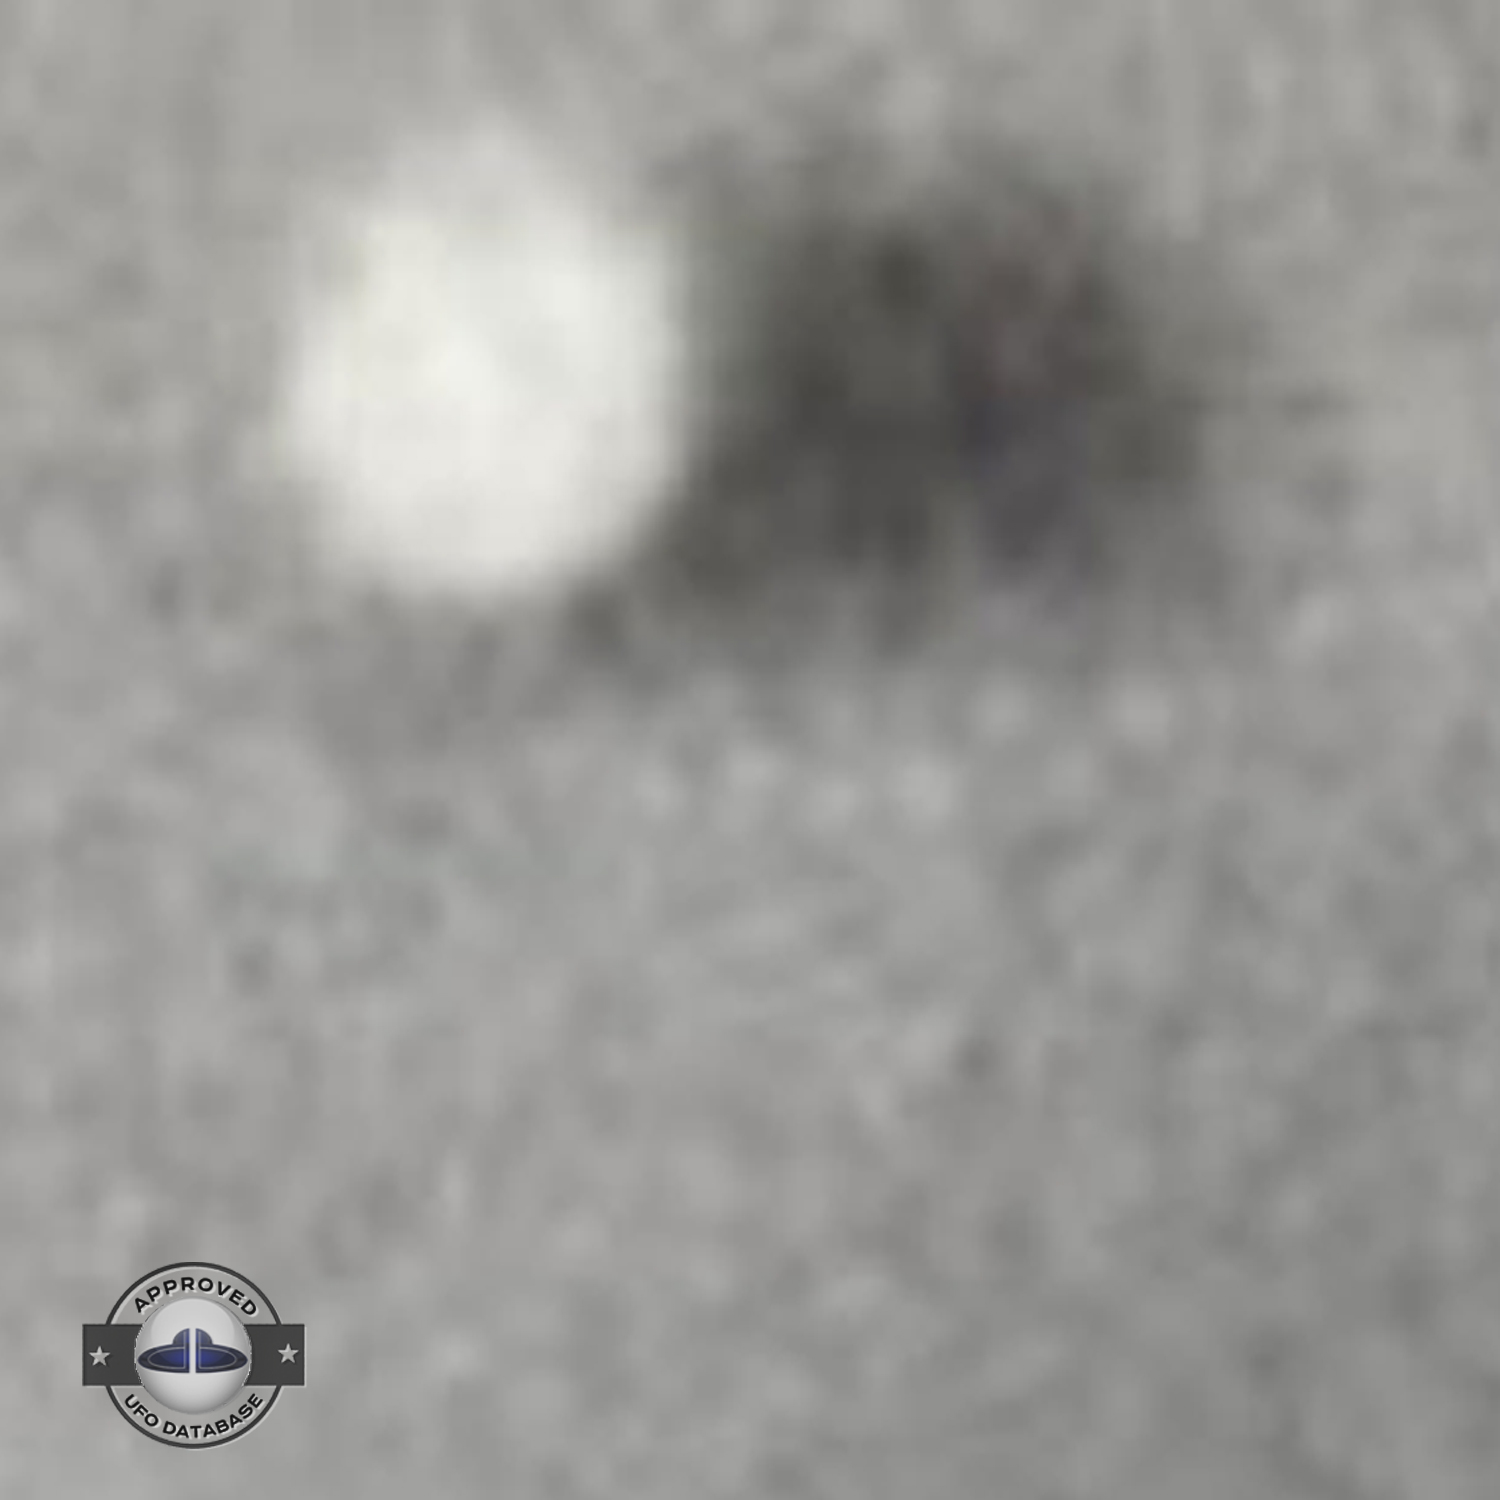 UFO is rotating on its own, by the blur aspect of the object | Japan UFO Picture #147-5